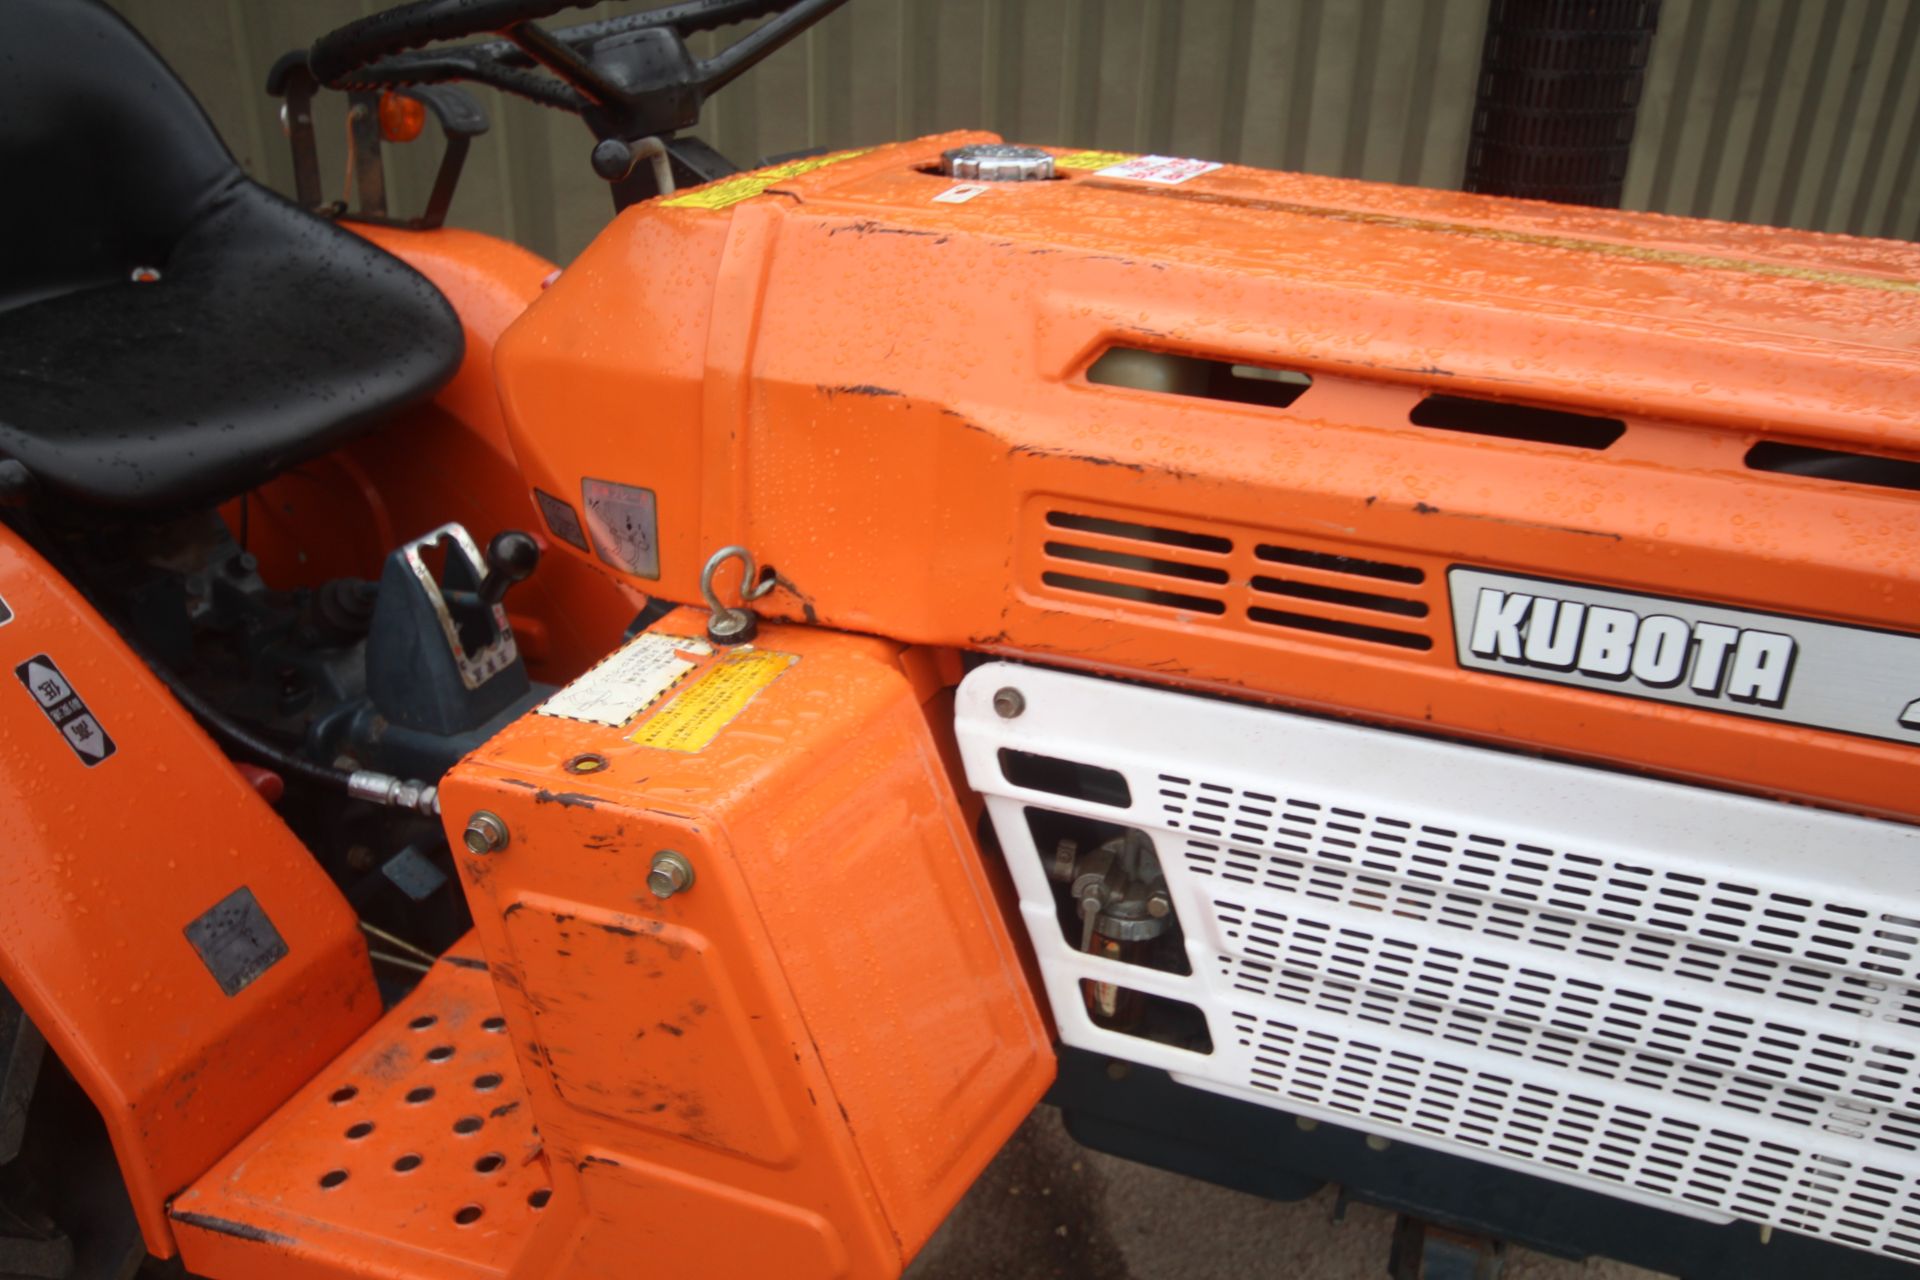 Kubota ZB1500 2WD compact tractor. 896 hours. 8-18 rear wheels and tyres @ 90%. - Image 8 of 31